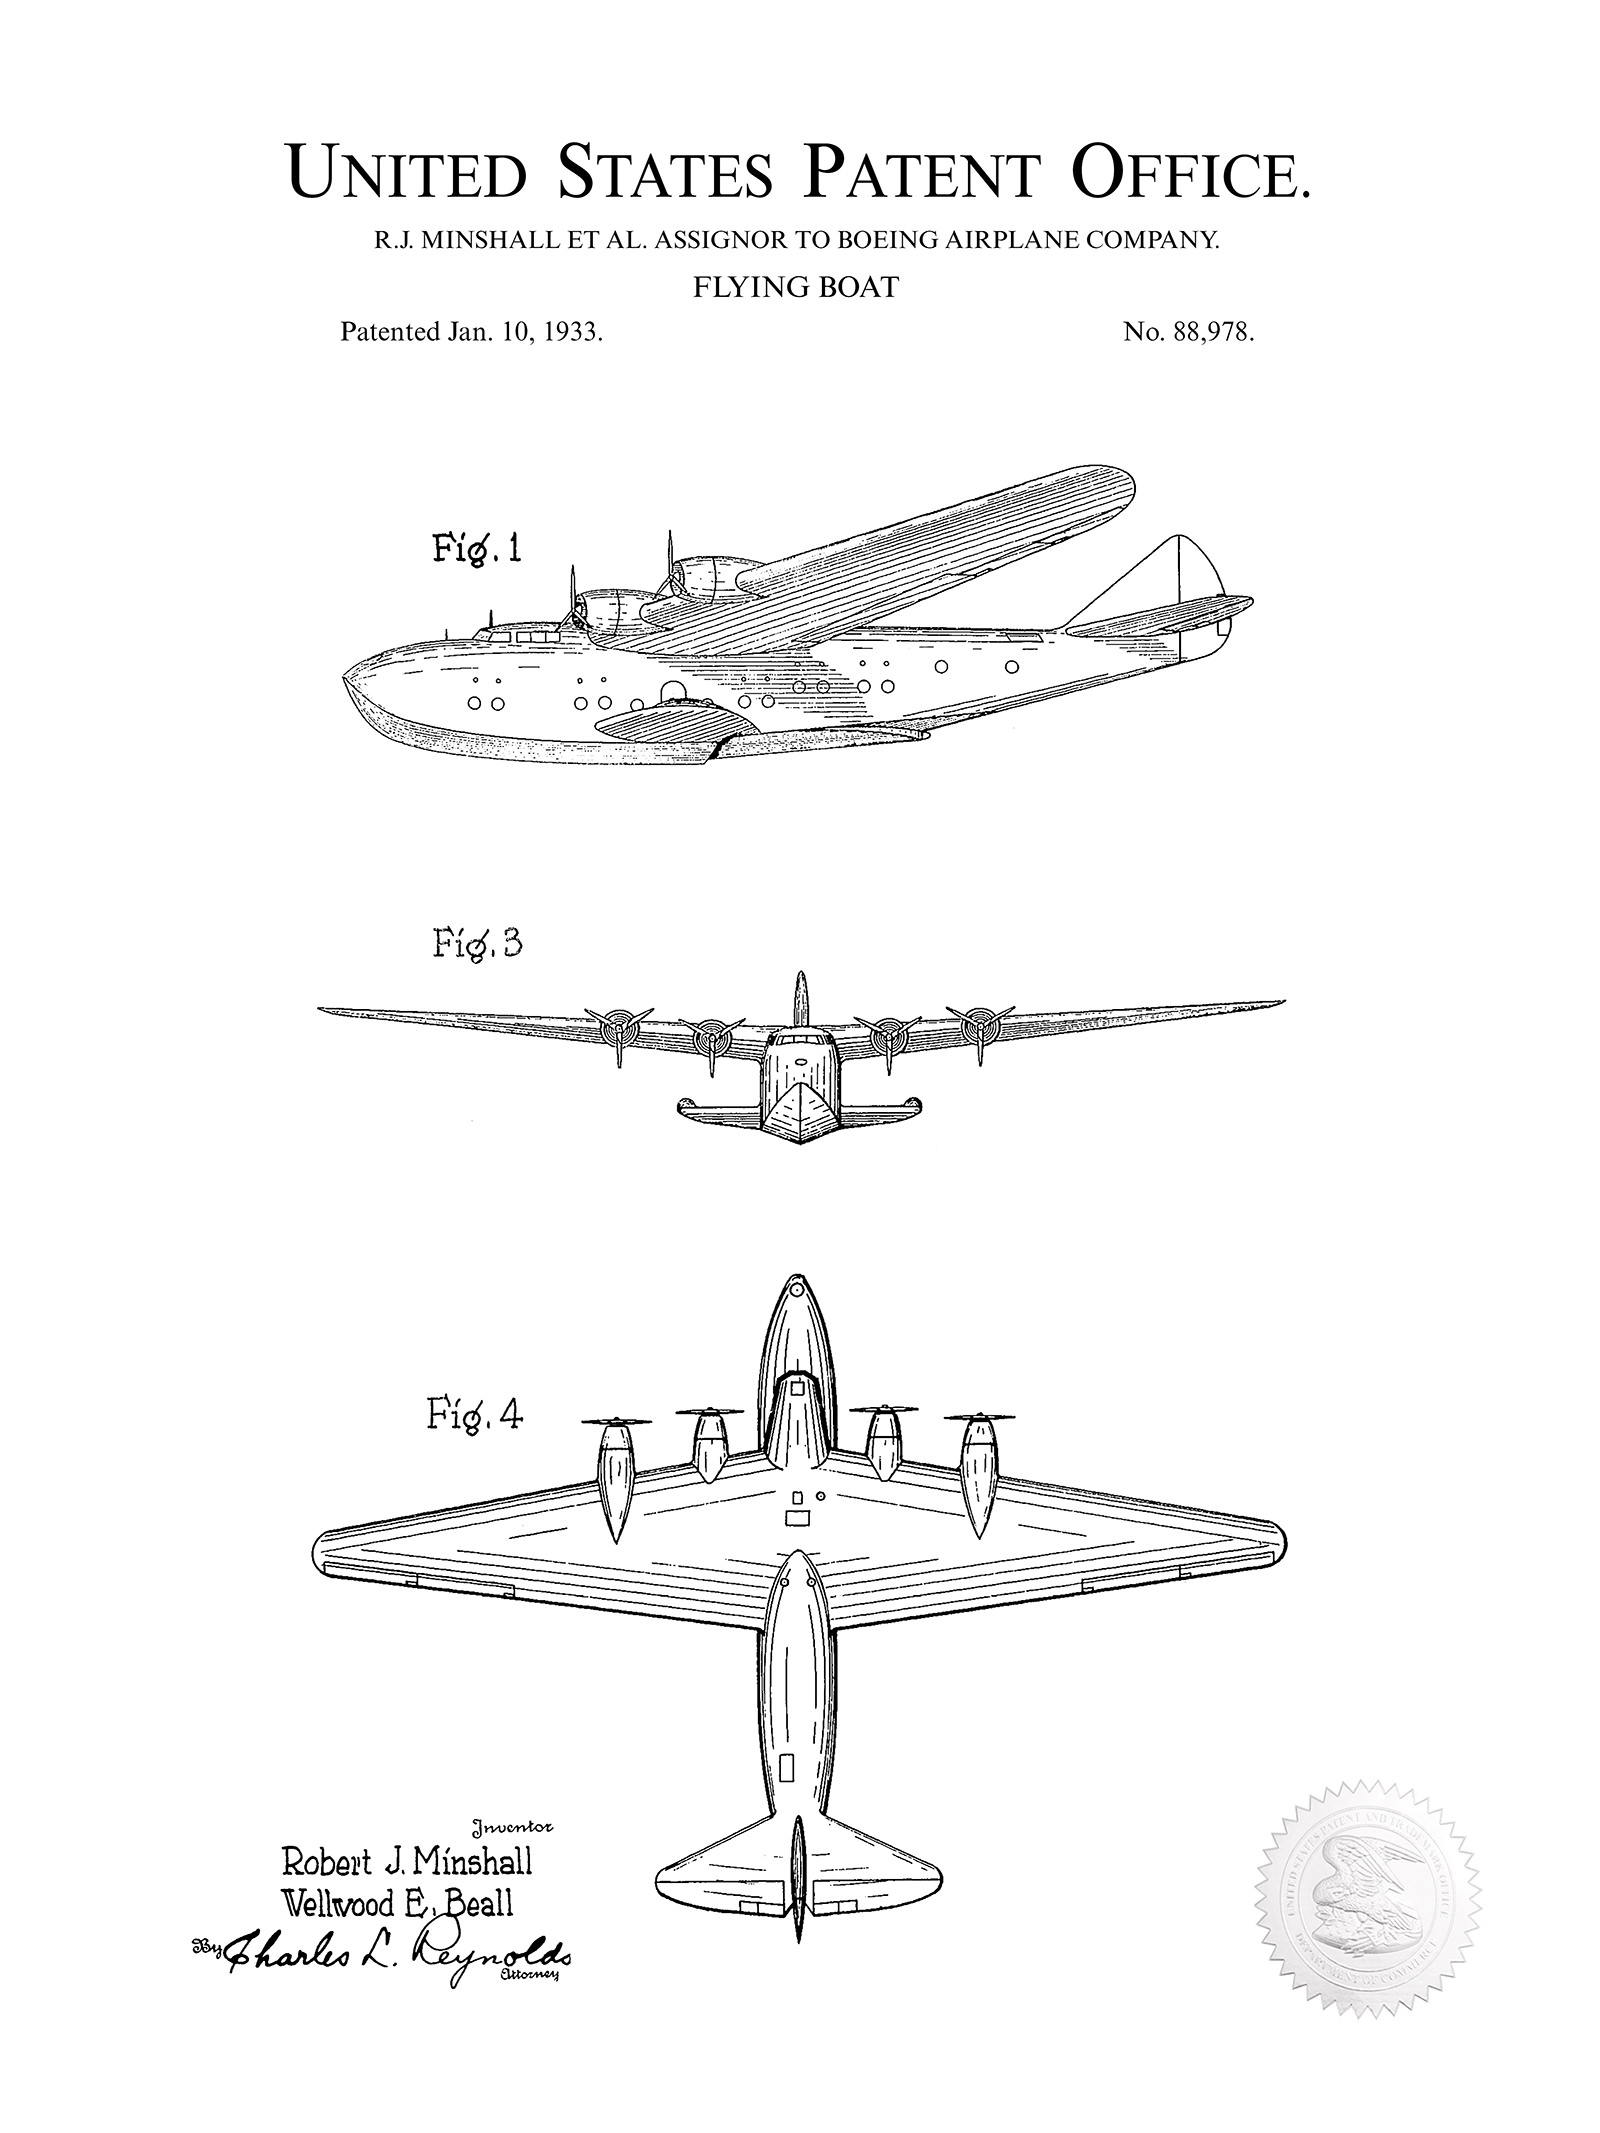 Boeing 314 Clipper - 1933 Airplane Patent